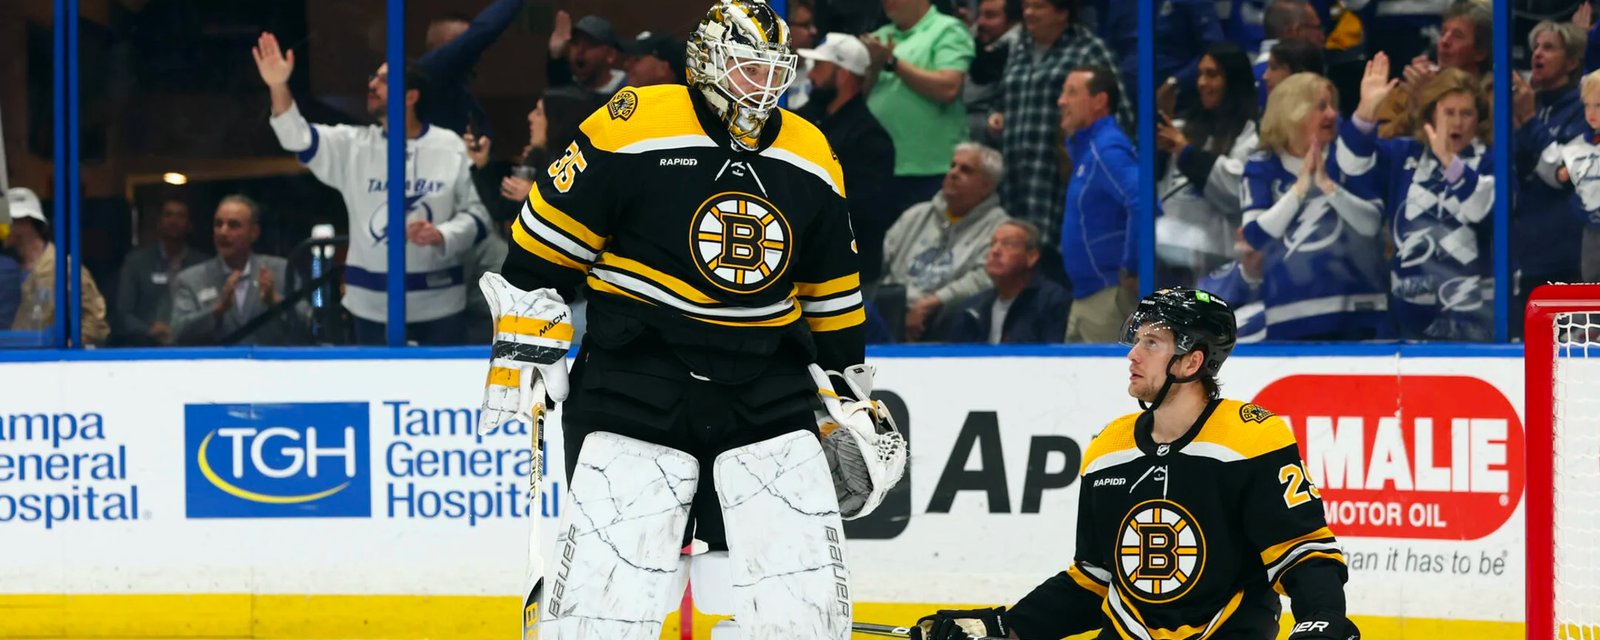 Bruins’ trade plans fall through, force new strategy in Boston